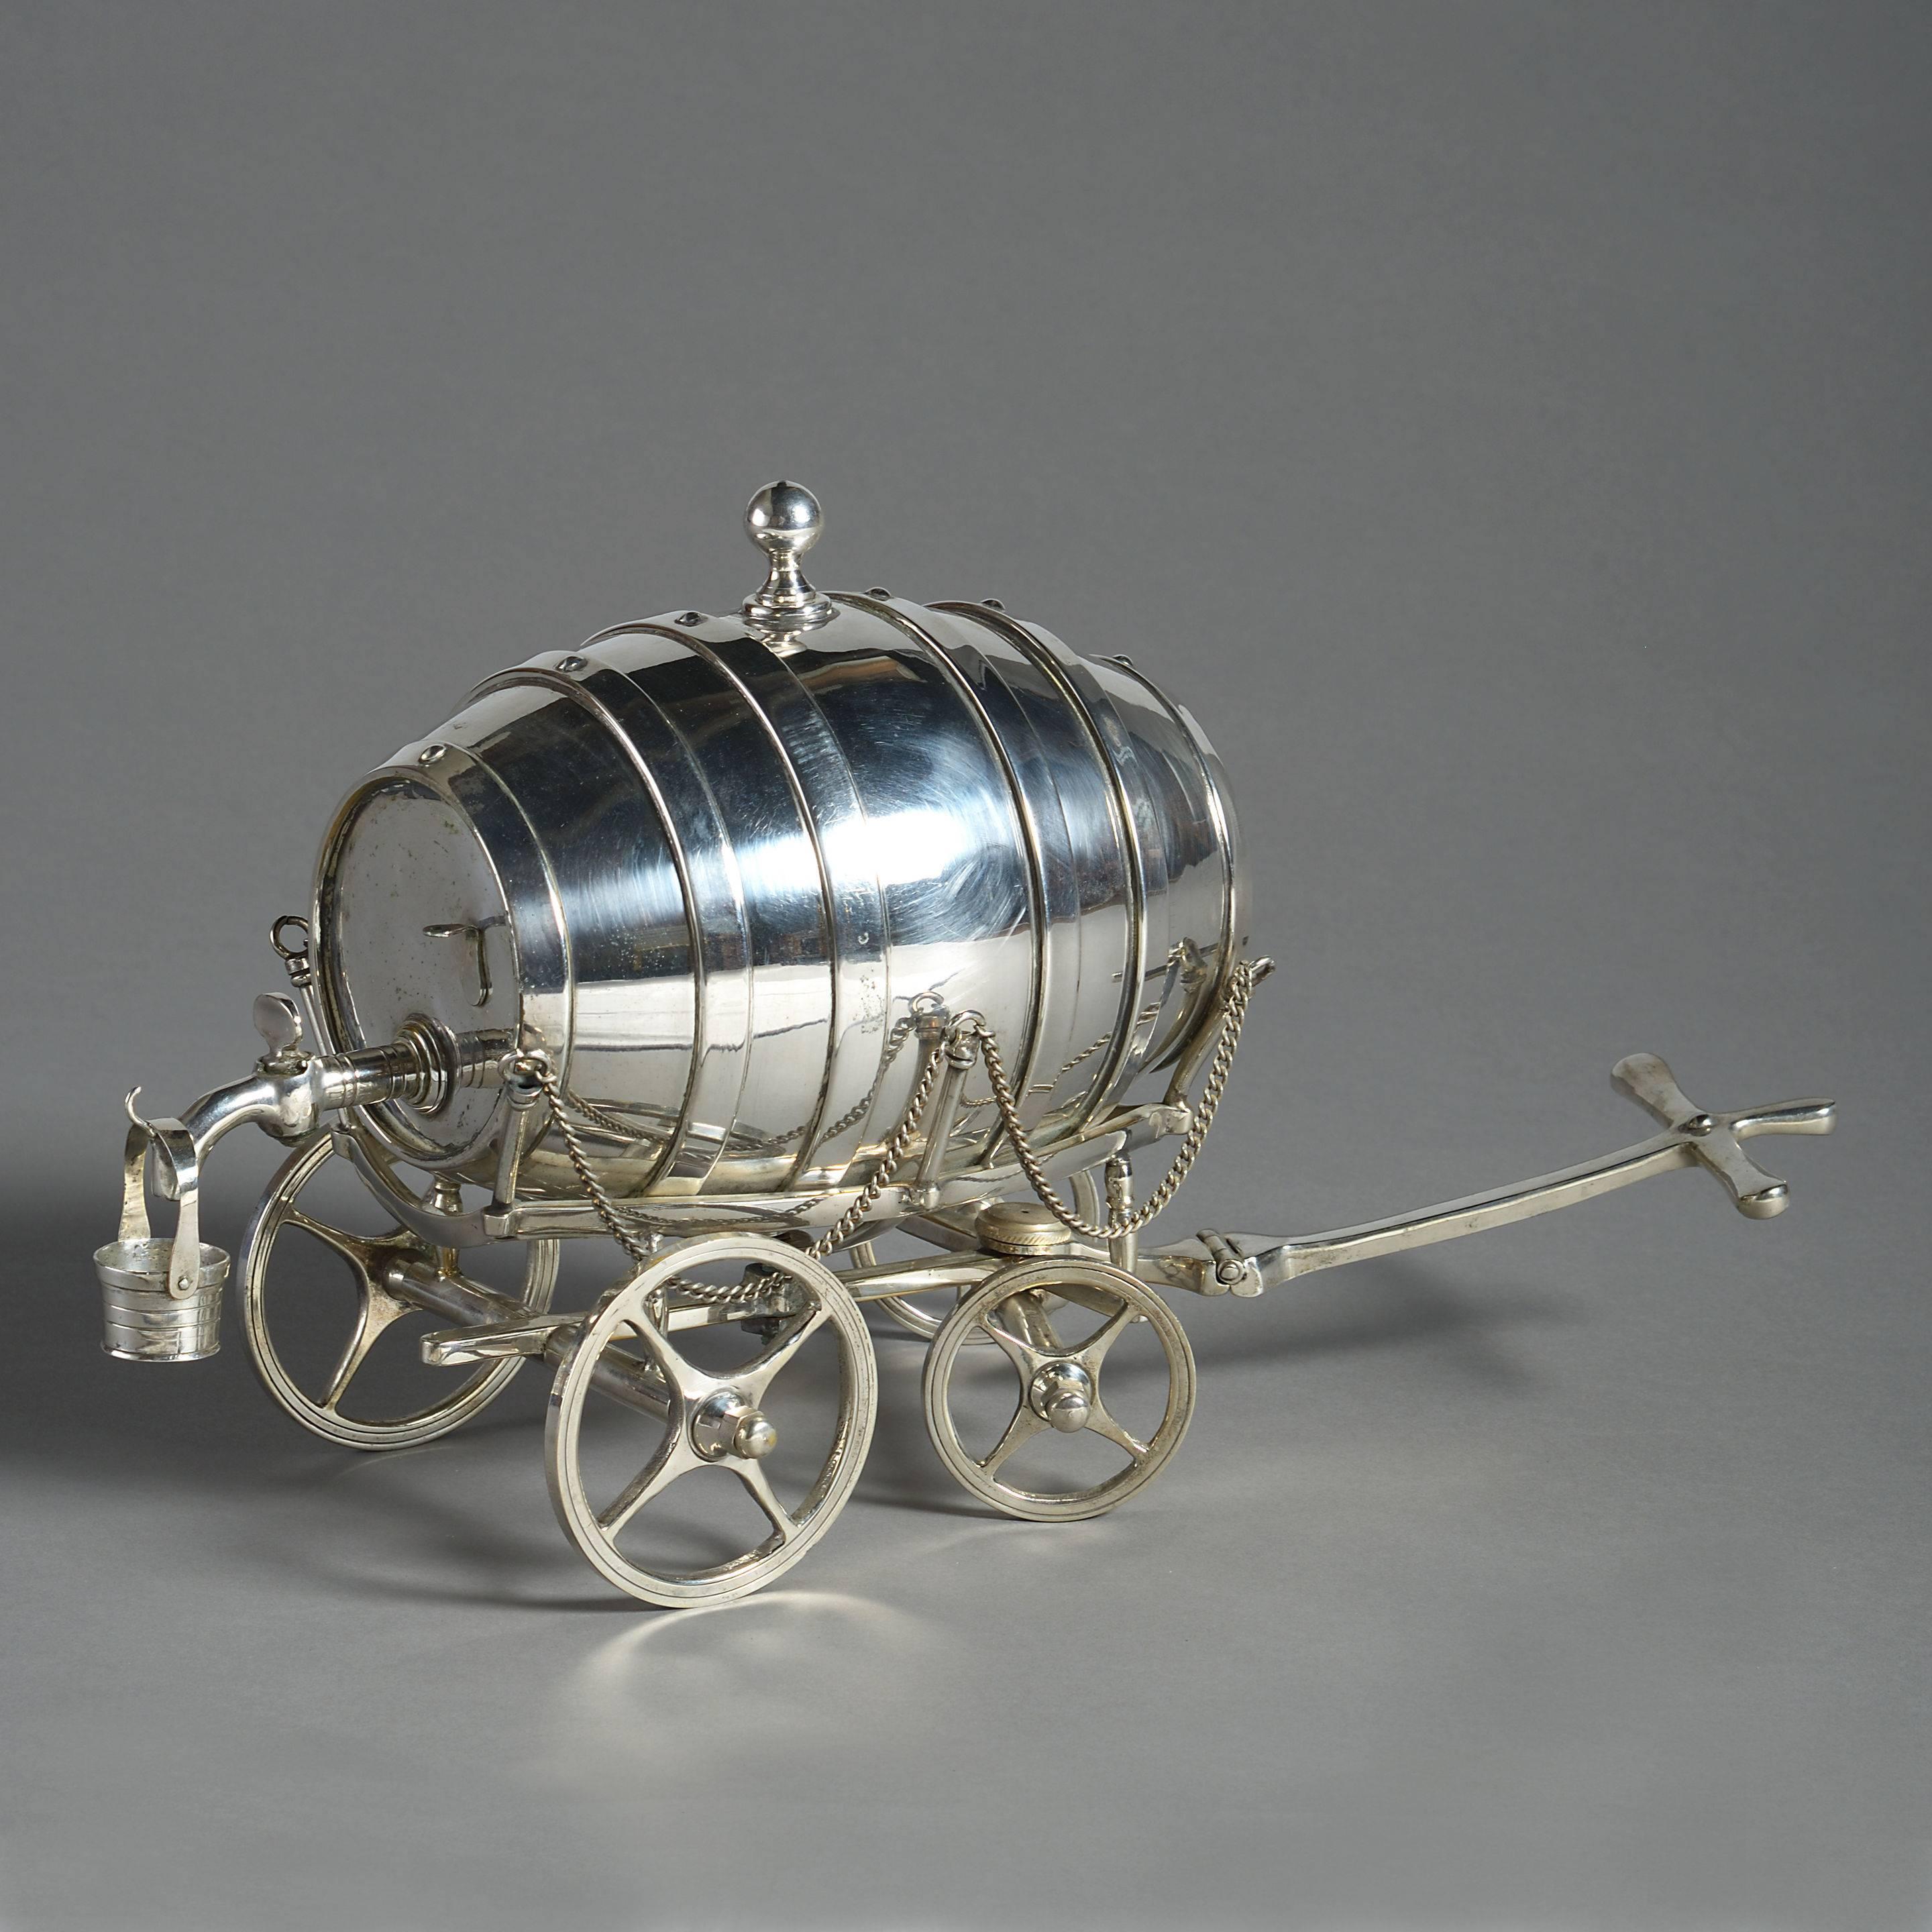 A rare late 19th century novelty silver plated spirit barrel, set upon a carriage and retaining the original measure bucket.